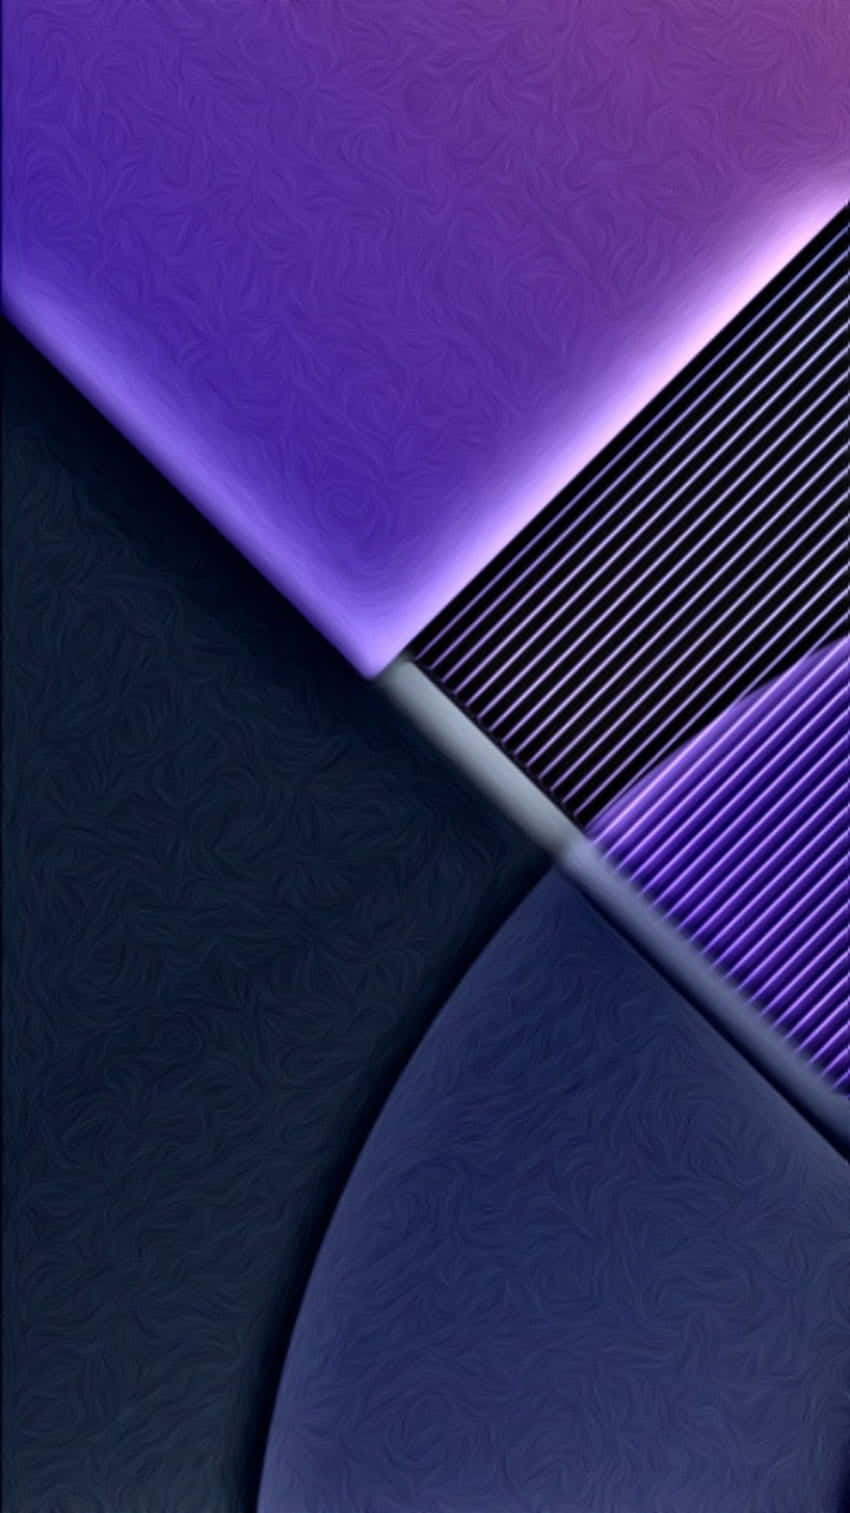 A Purple And Black Background With A Purple And Black Design Wallpaper